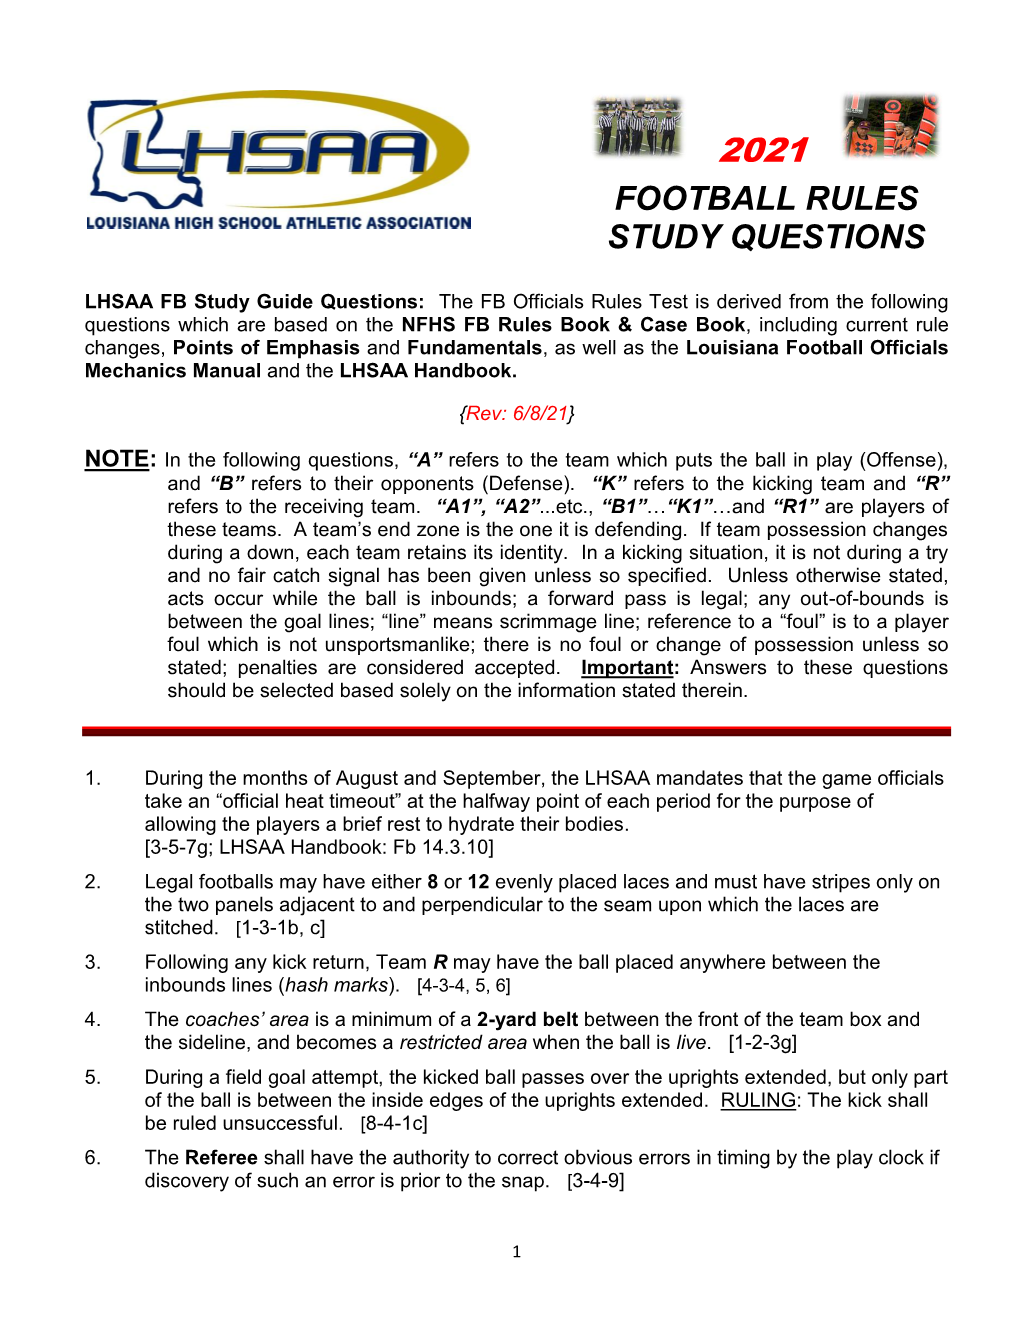 Football Rules Study Questions